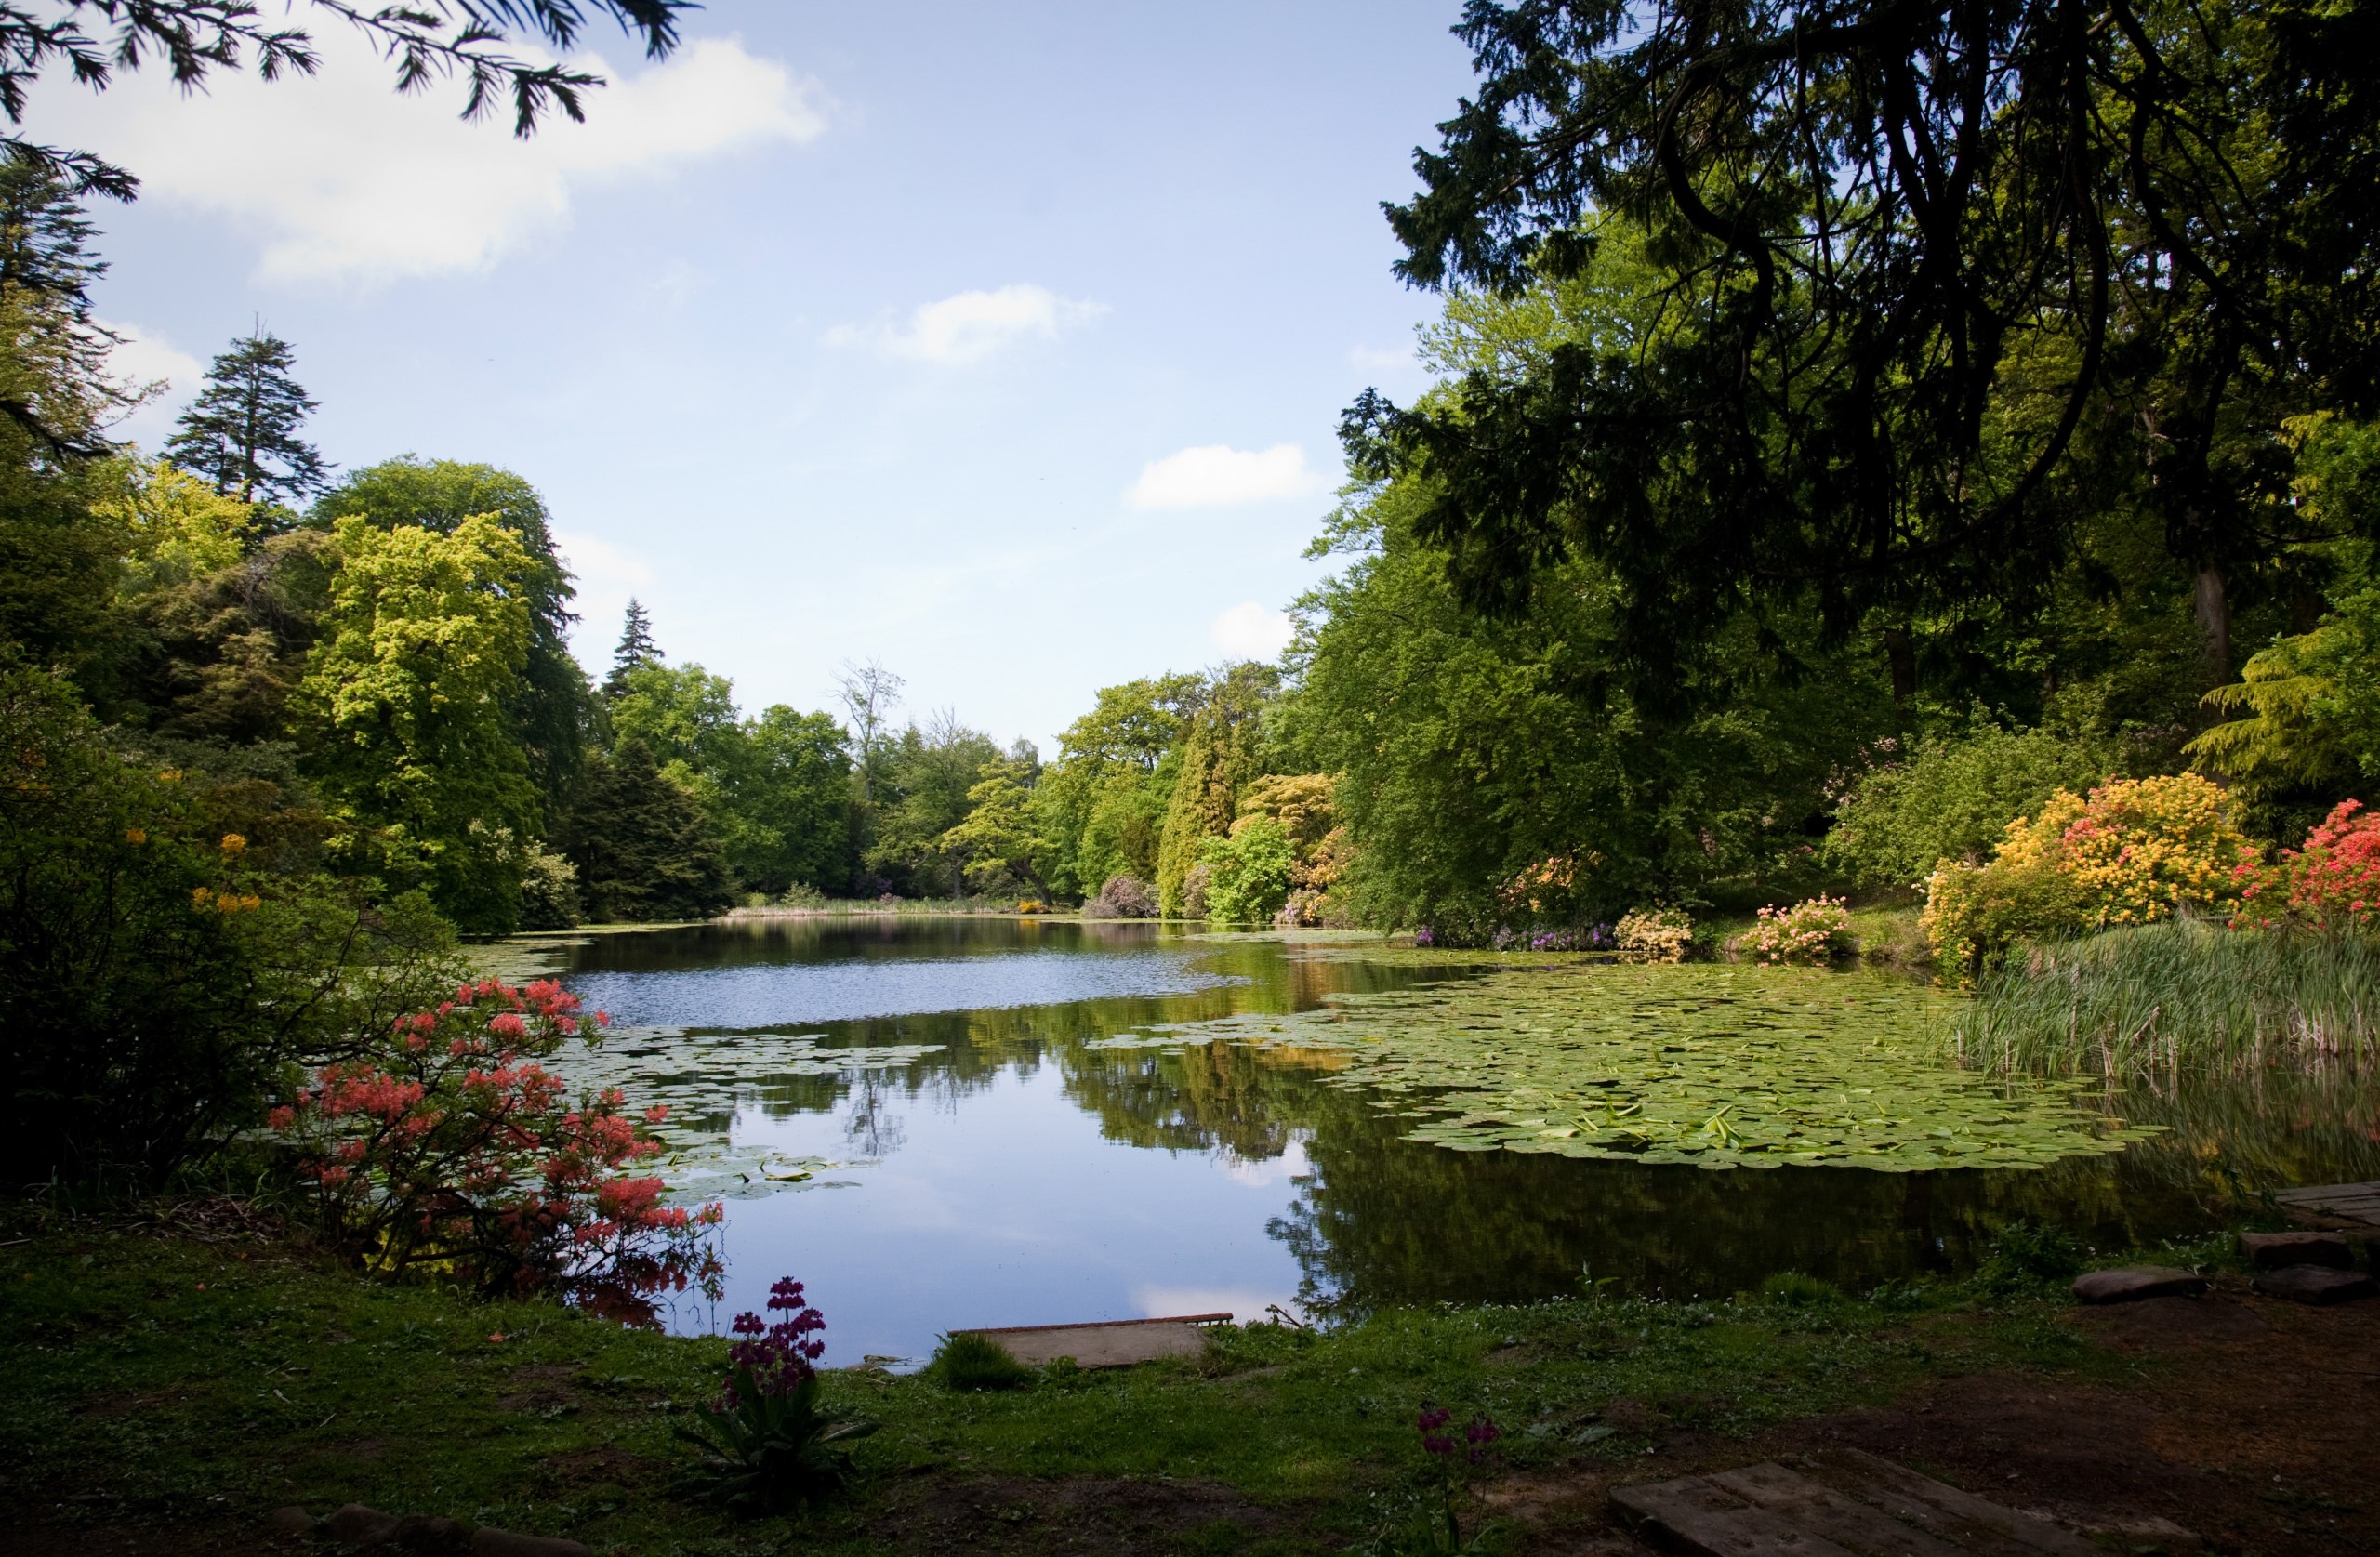 A lake with lily pads surrounded by green trees on a sunny day in the parkland at Swinton Estate